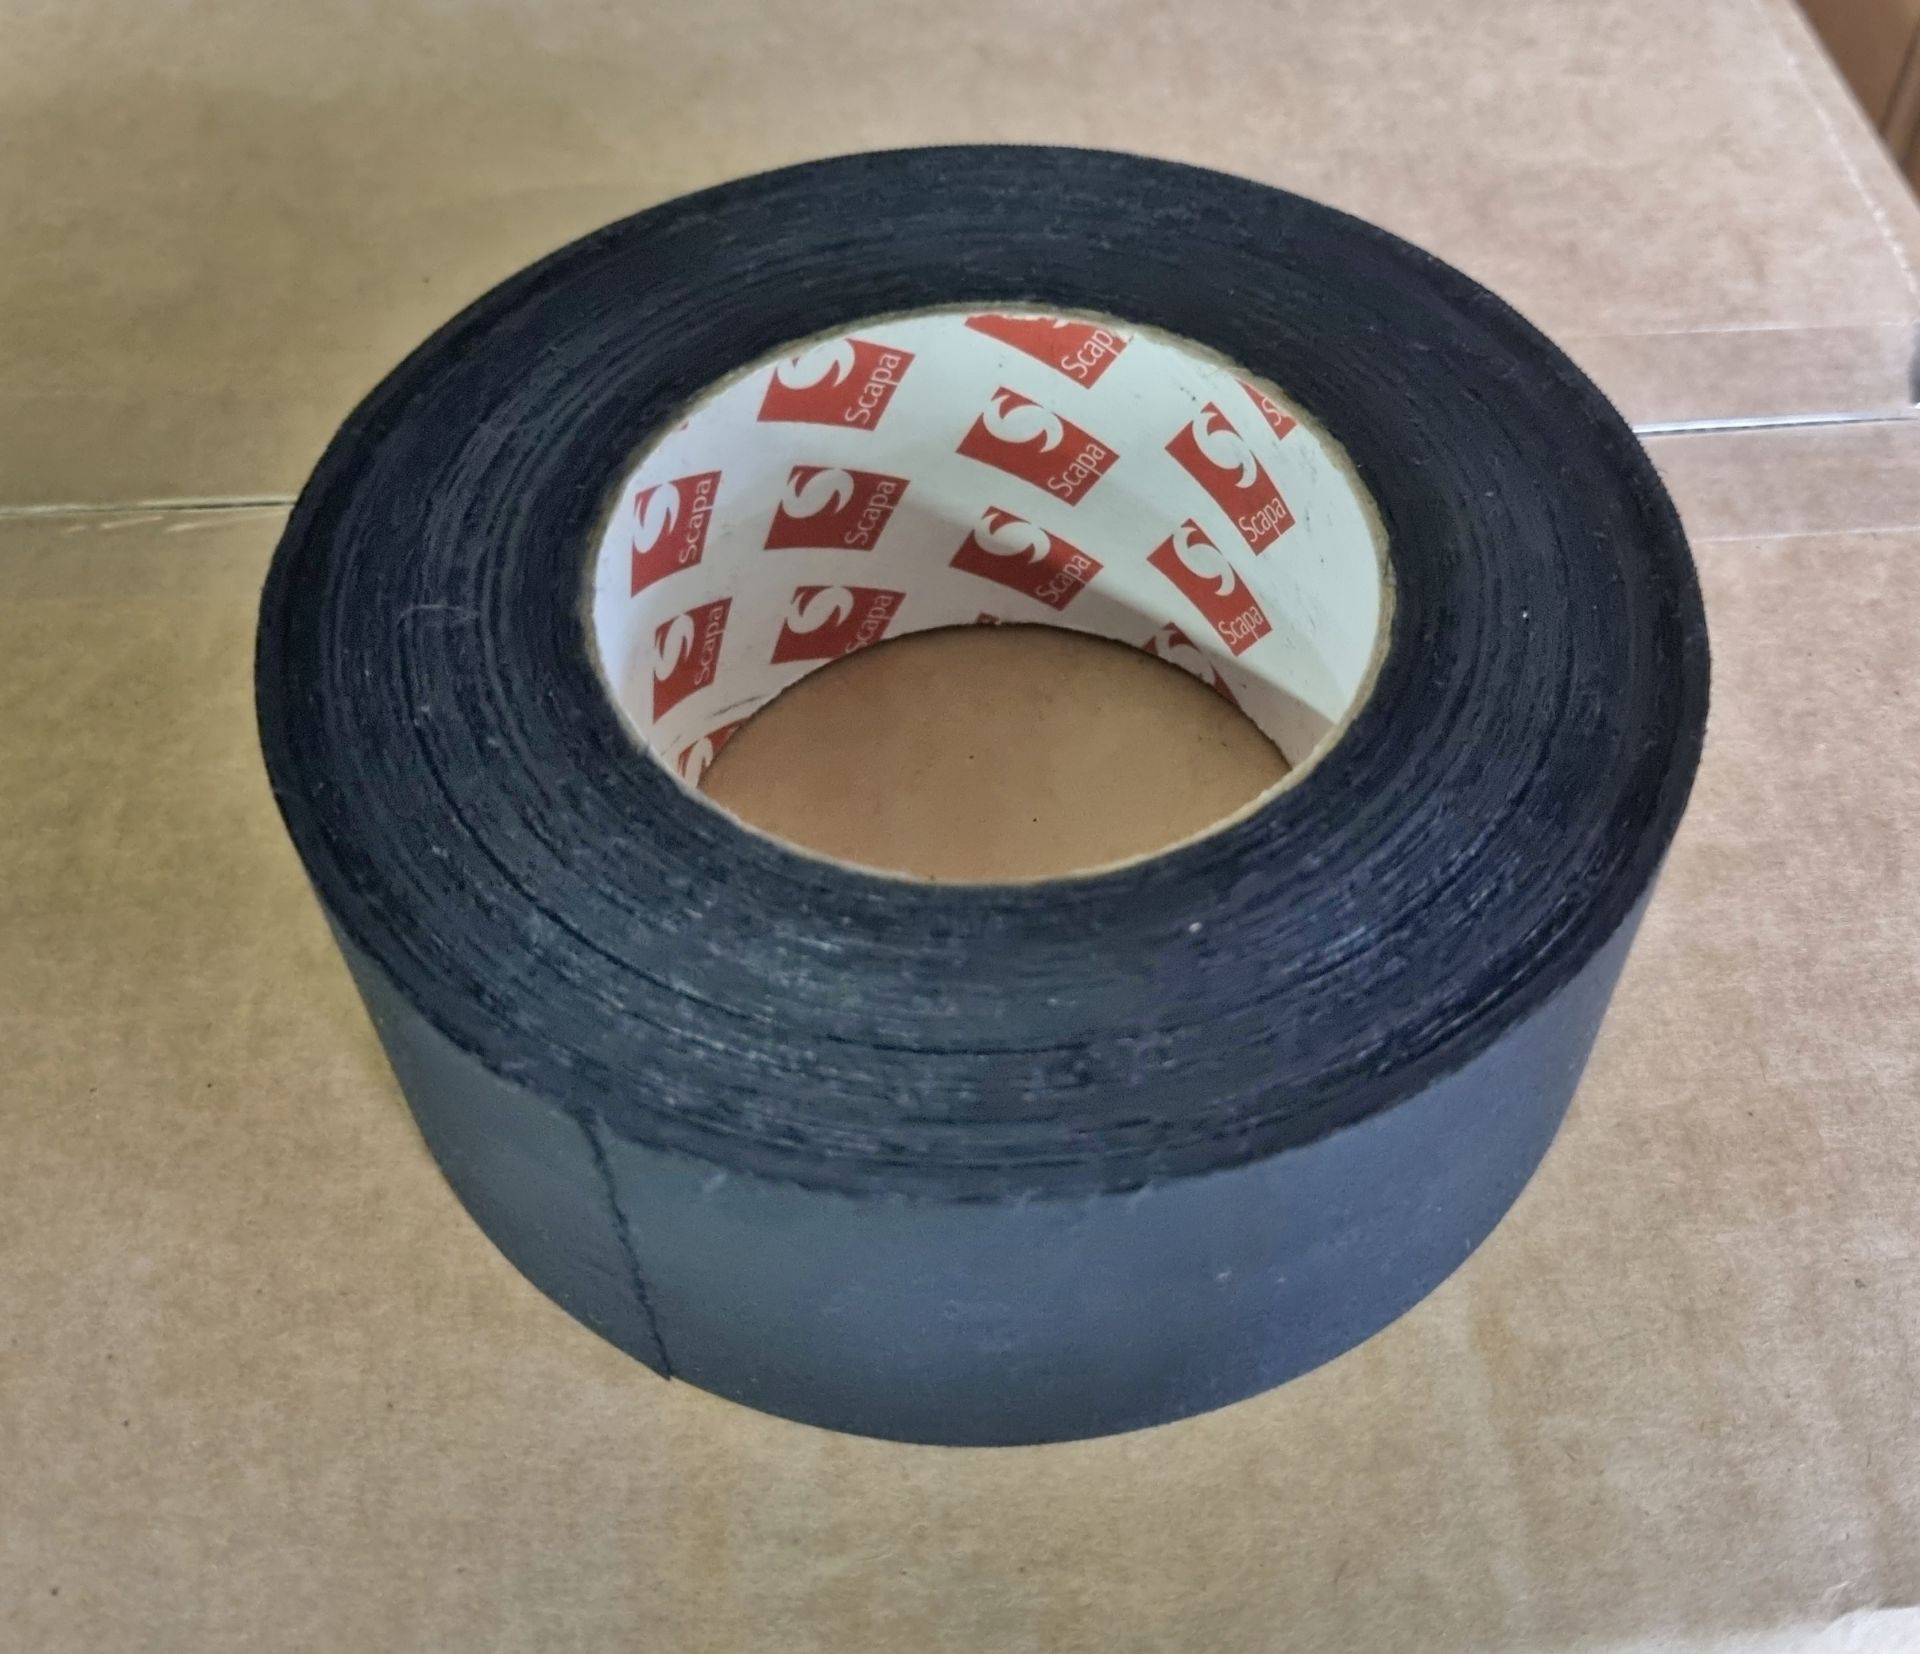 15x boxes of Scapa 3370 Rayon cloth fabric black adhesive tape, 50mm width, 50m length, box of 16 - Image 4 of 5